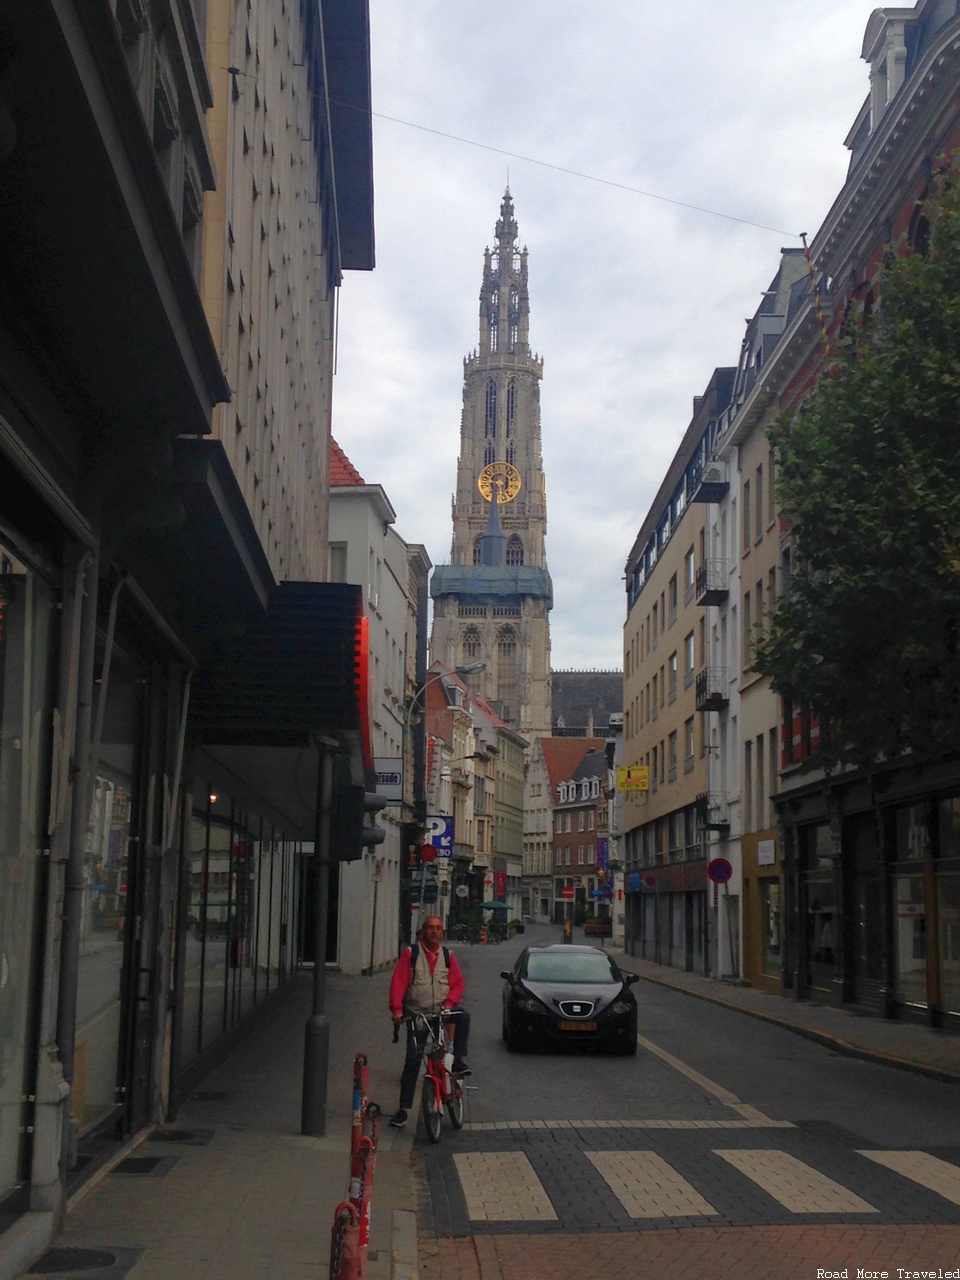 Distant view of Our Lady of Antwerp cathedral